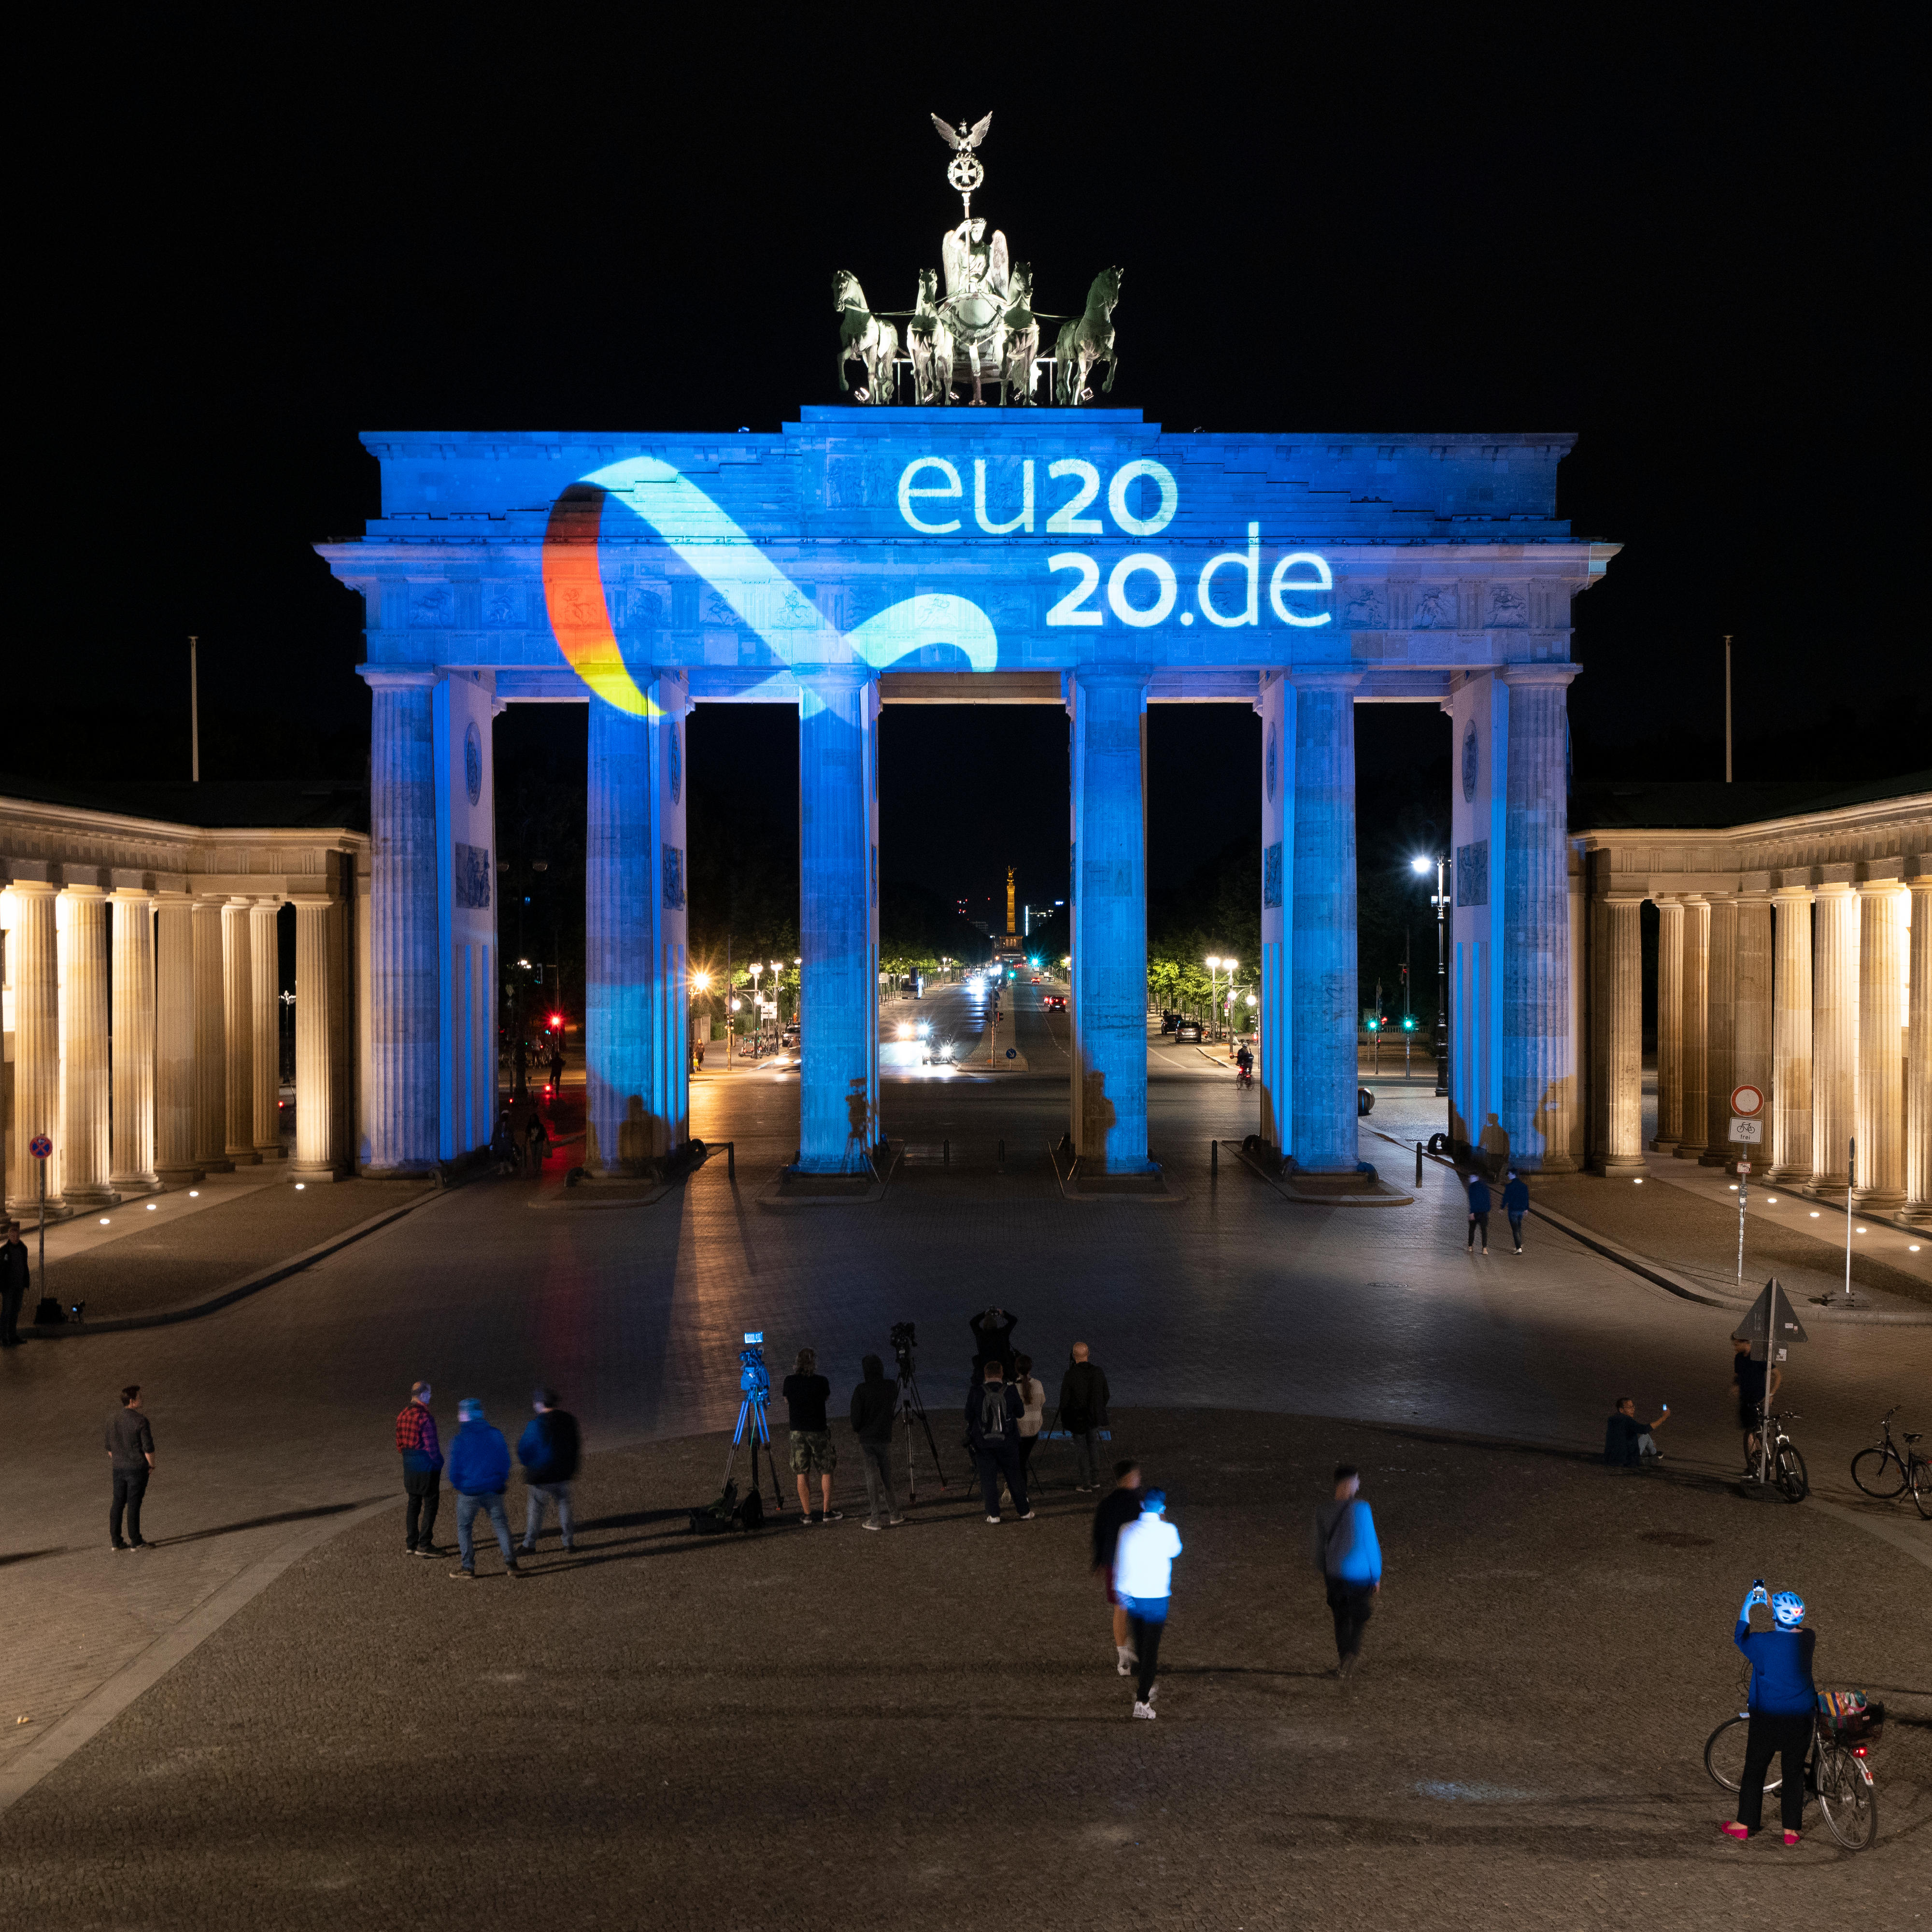 Illumination of the Brandenburg Gate to mark the start of the German EU Council Presidency from 1 July to 31 December 2020